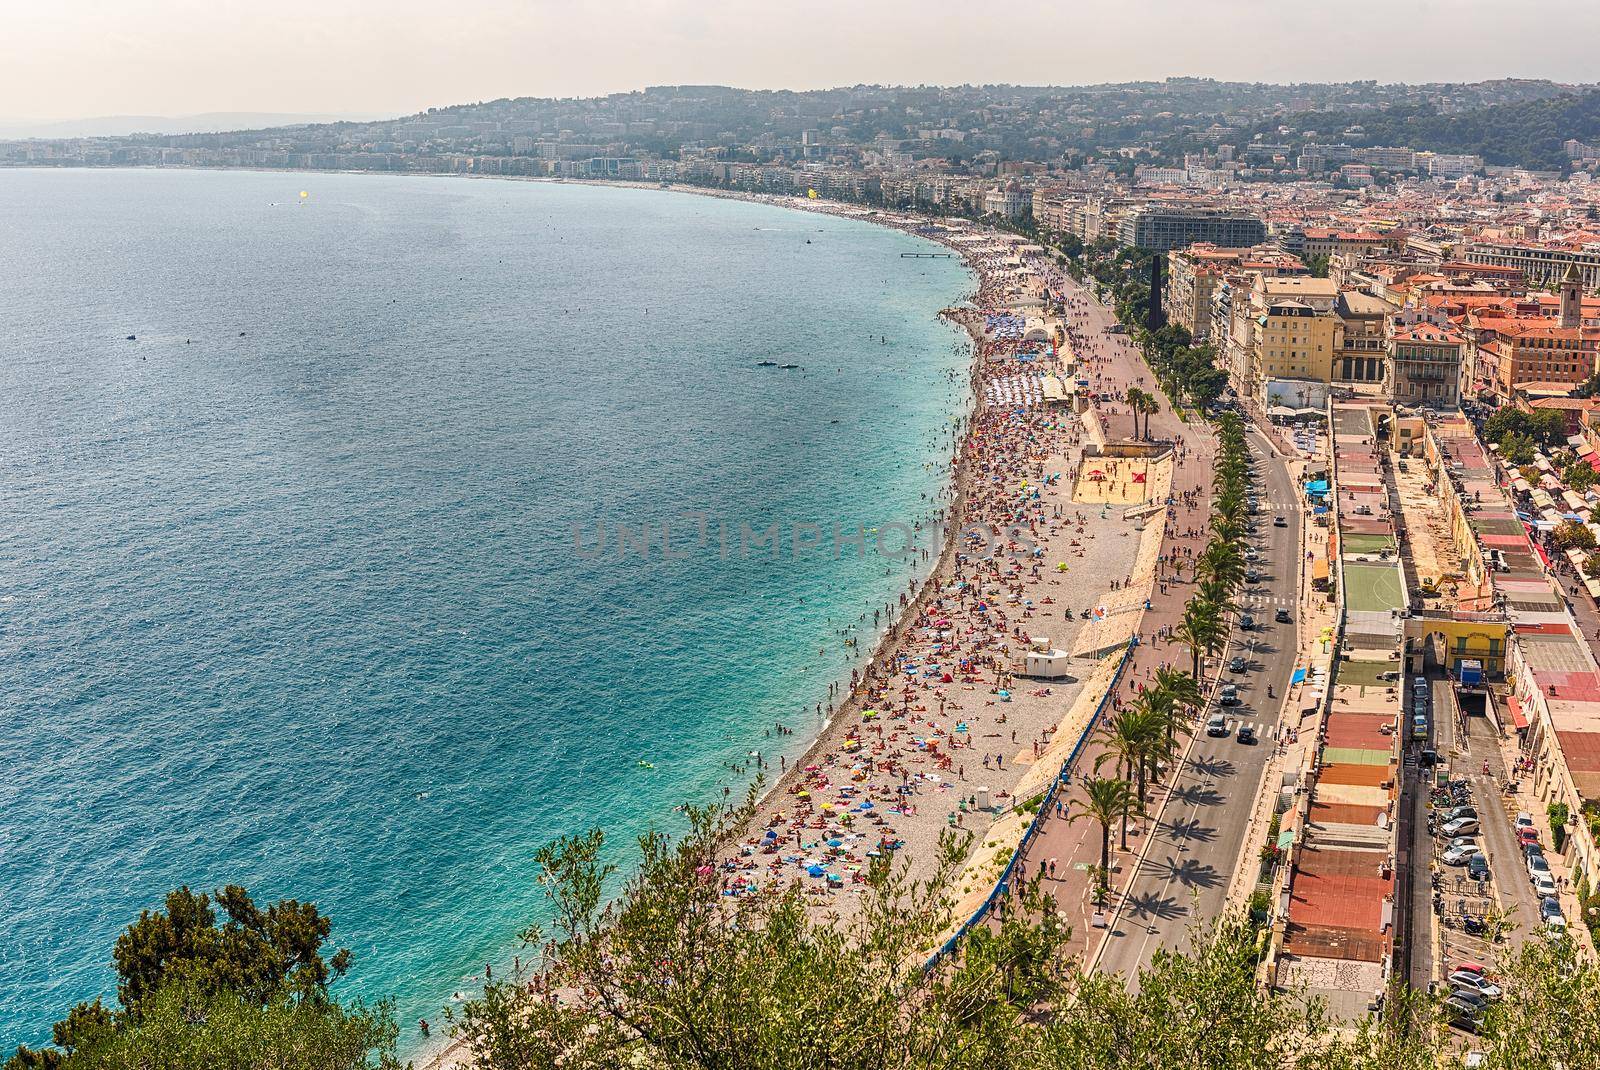 Aerial view of the waterfront in Nice, Cote d'Azur, France by marcorubino